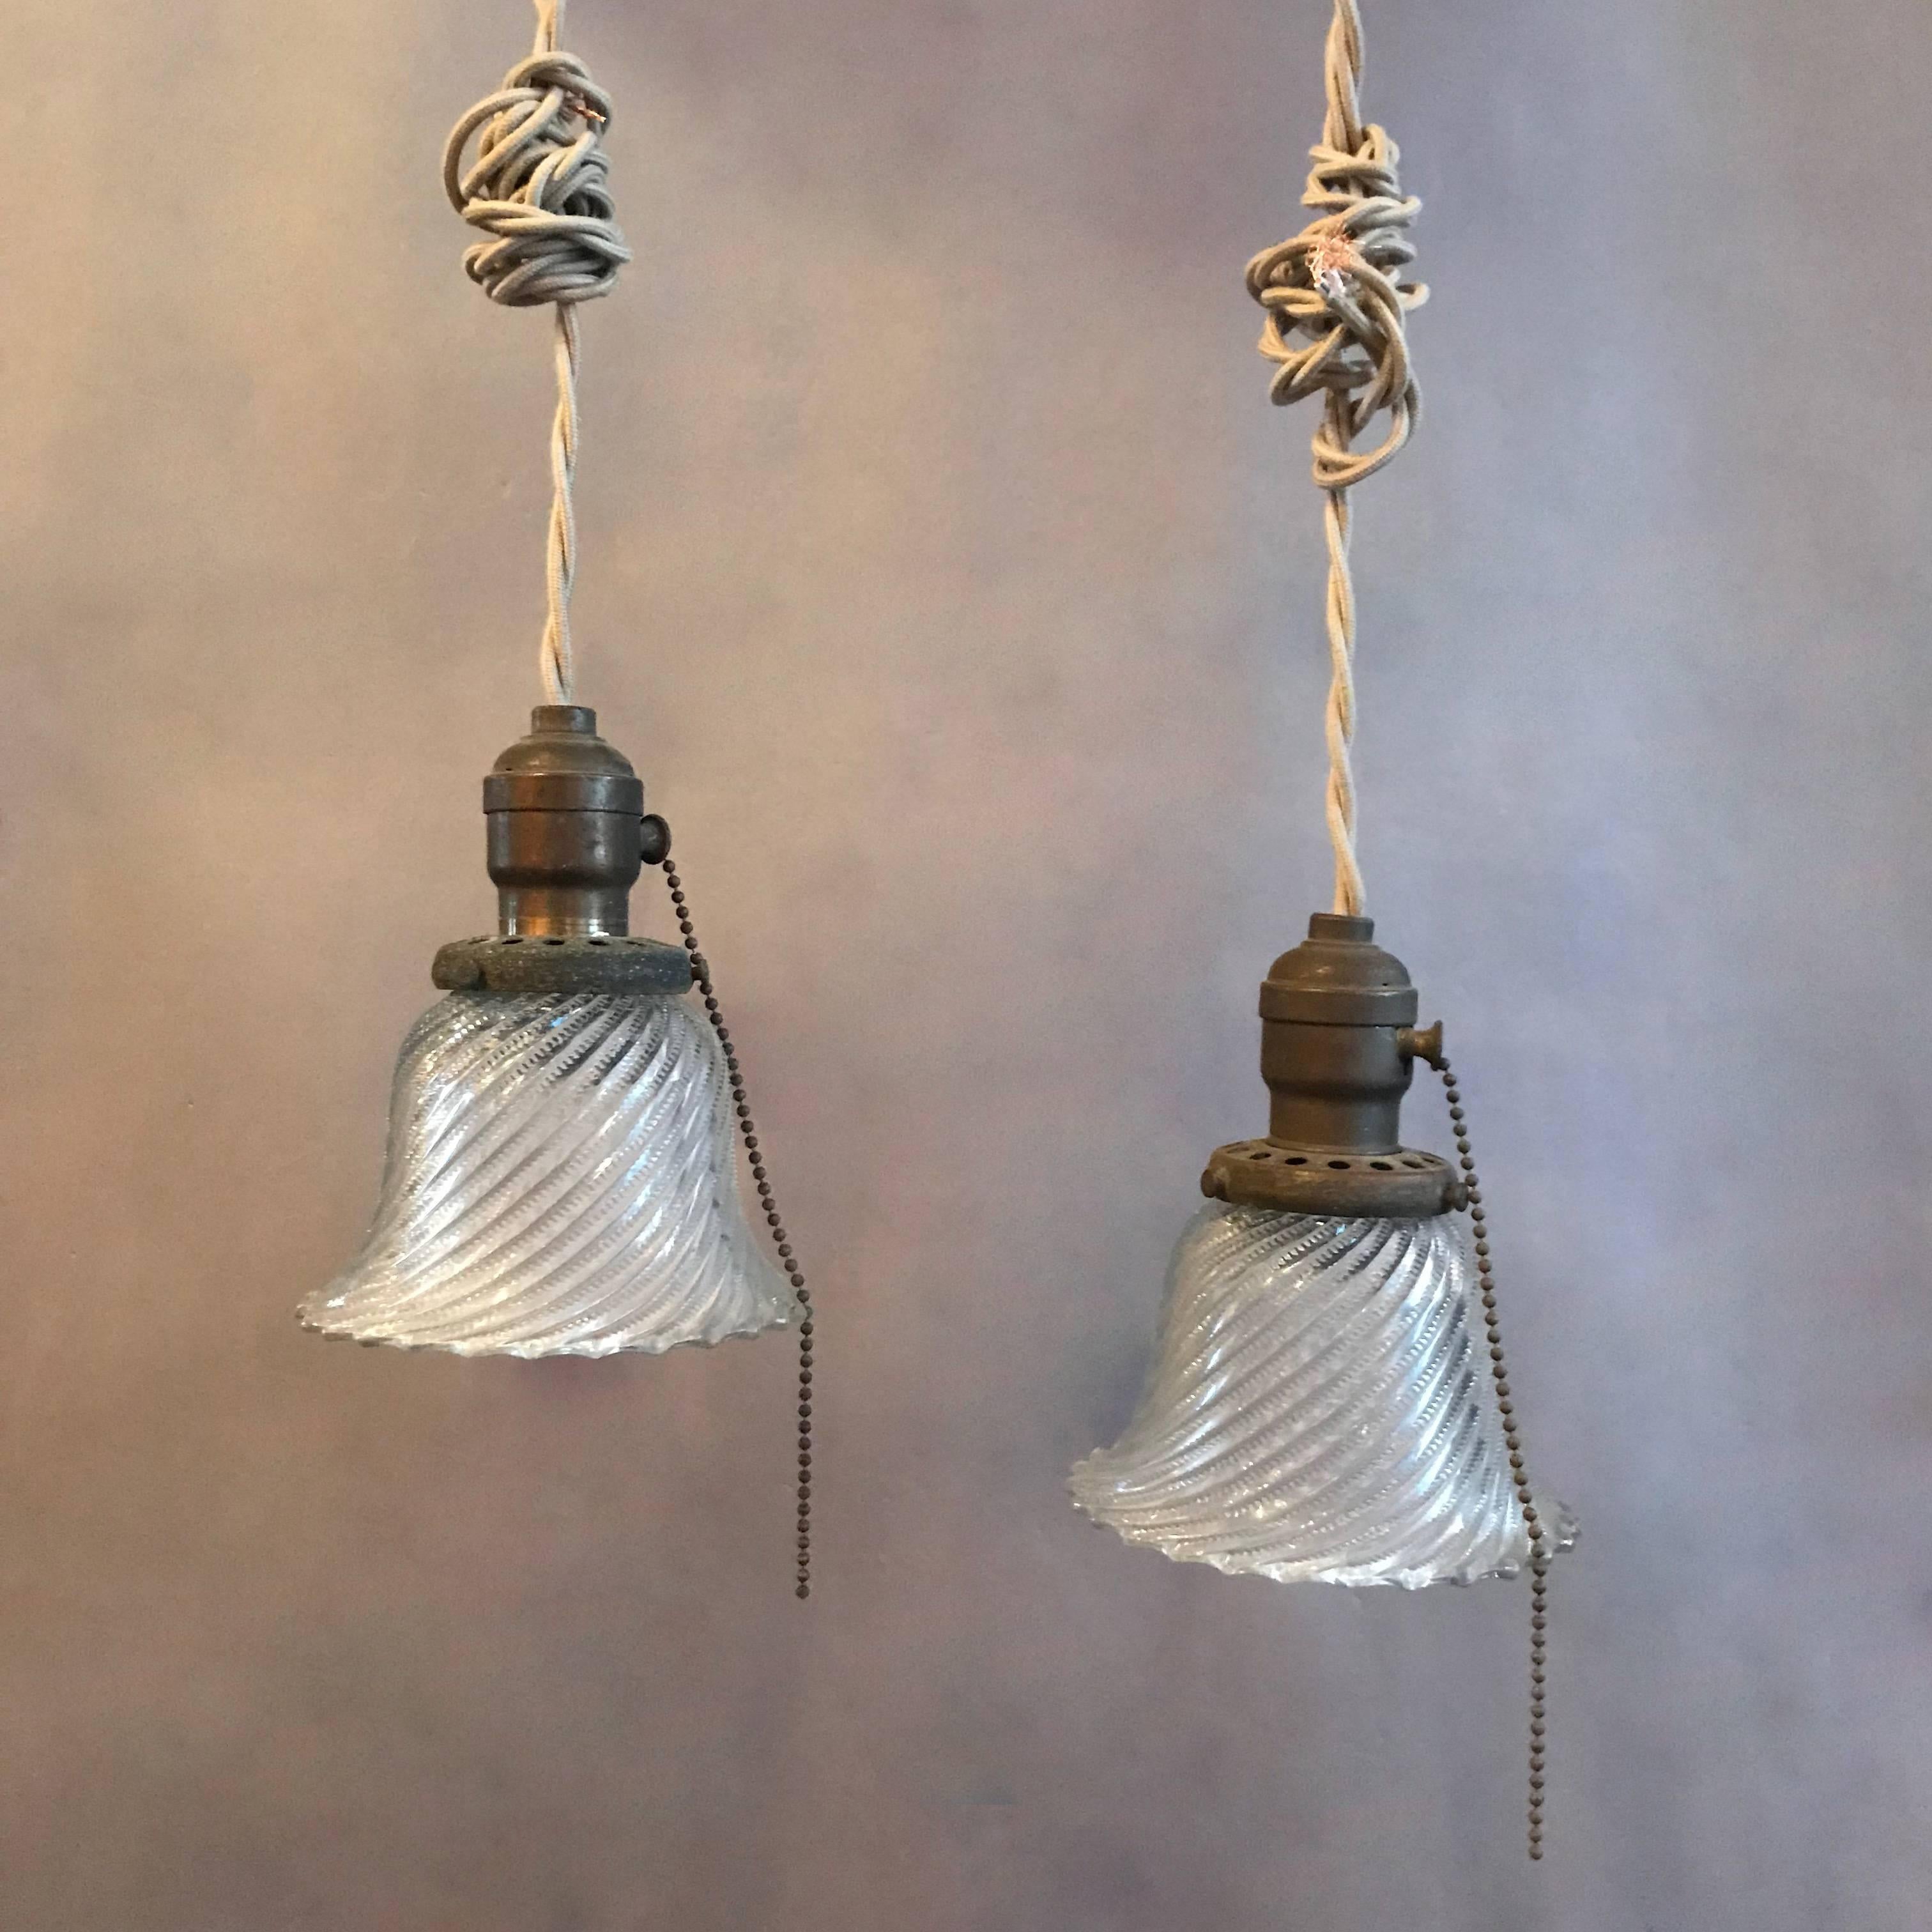 Industrial, diagonal swirled, Holophane pendant lights feature bell shaped shades with ruffled edges and brass fitters with pull chains. These lights are newly wired with 48in. of braided cloth cord.